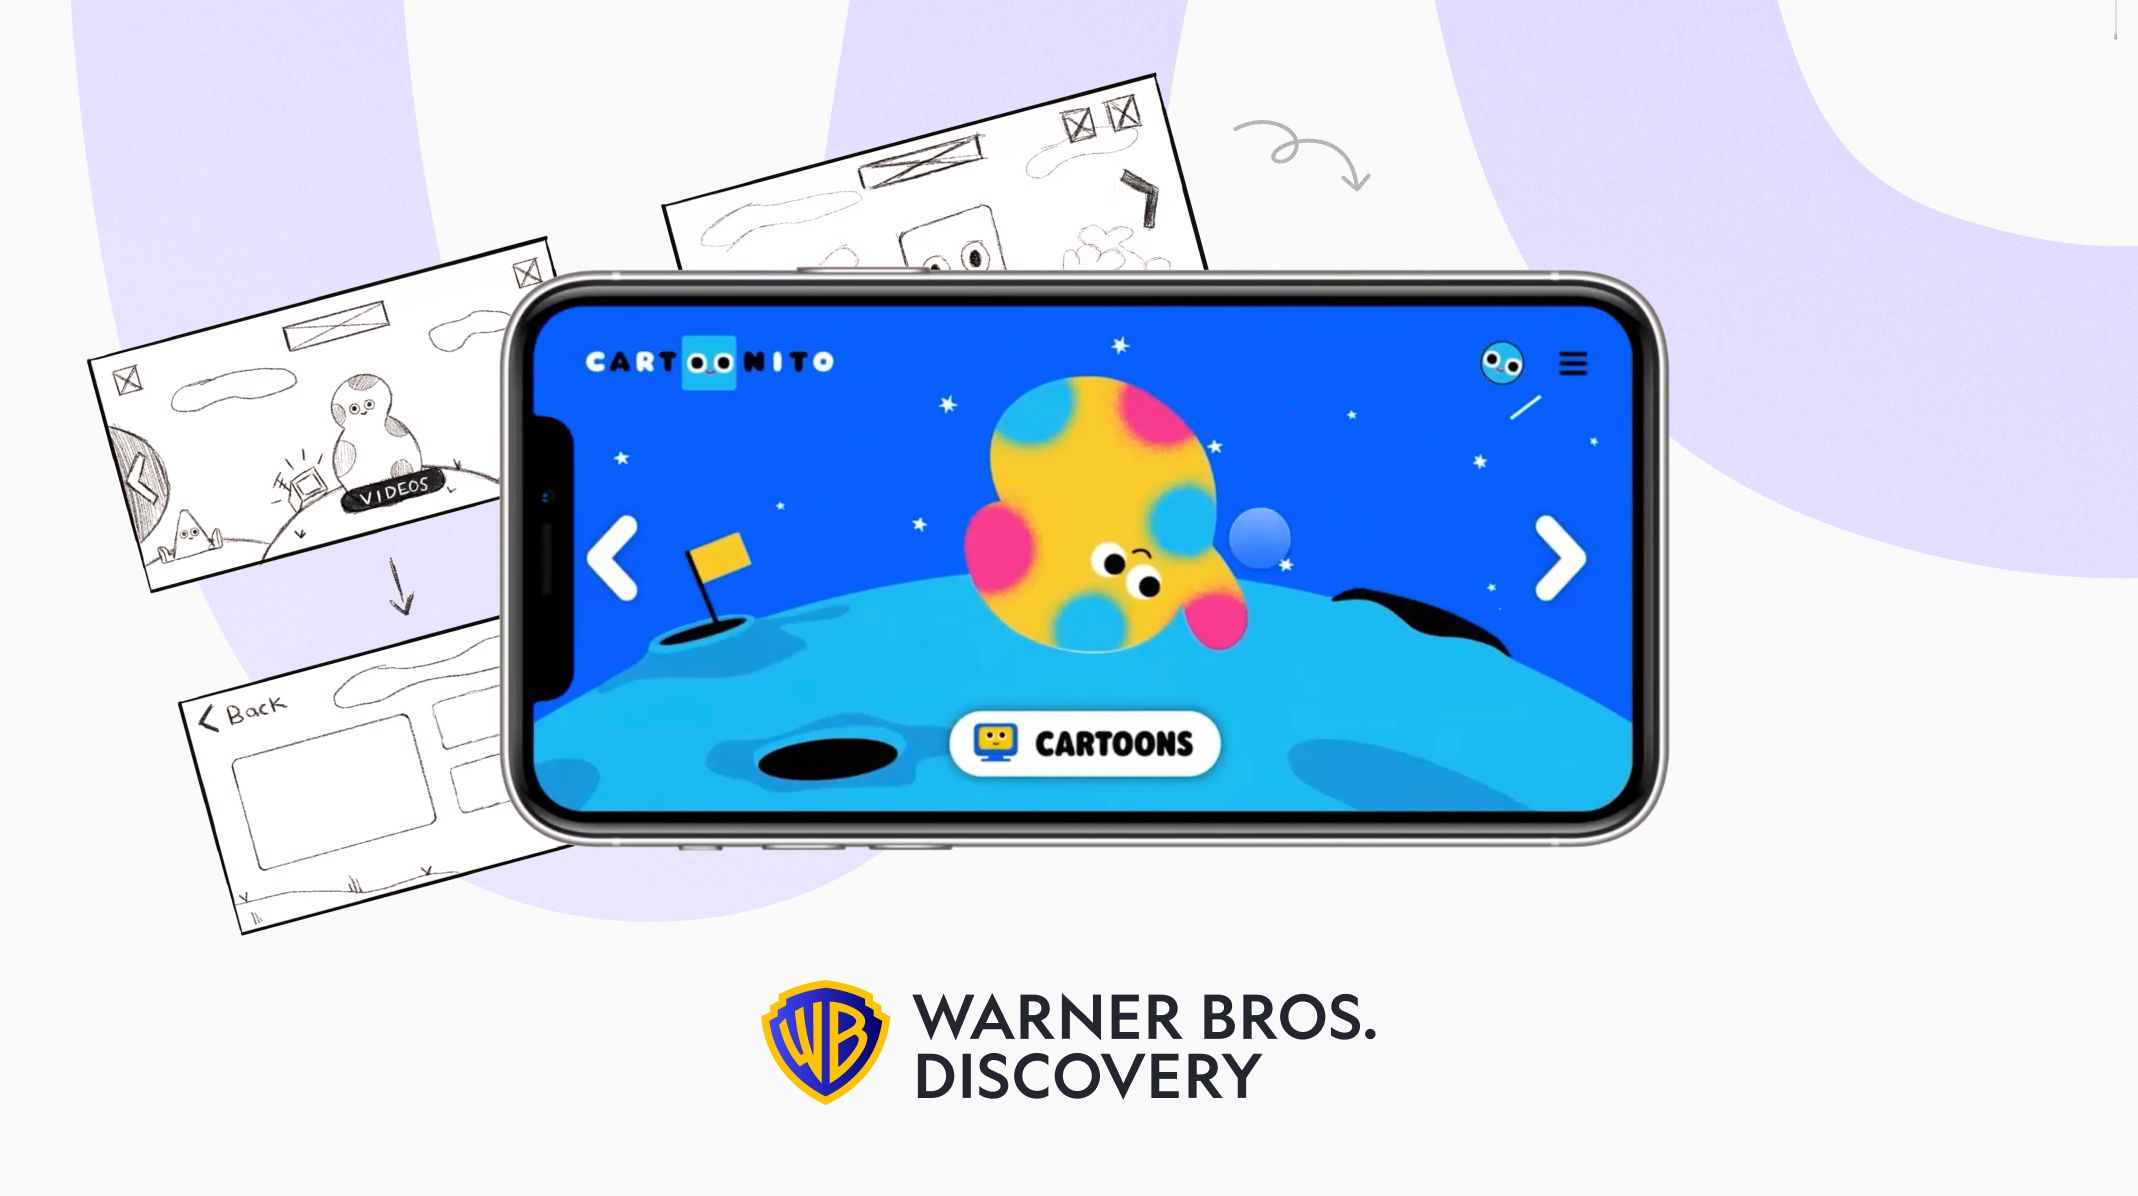 How Warner Bros. Discovery Uses ProtoPie for Product Innovation